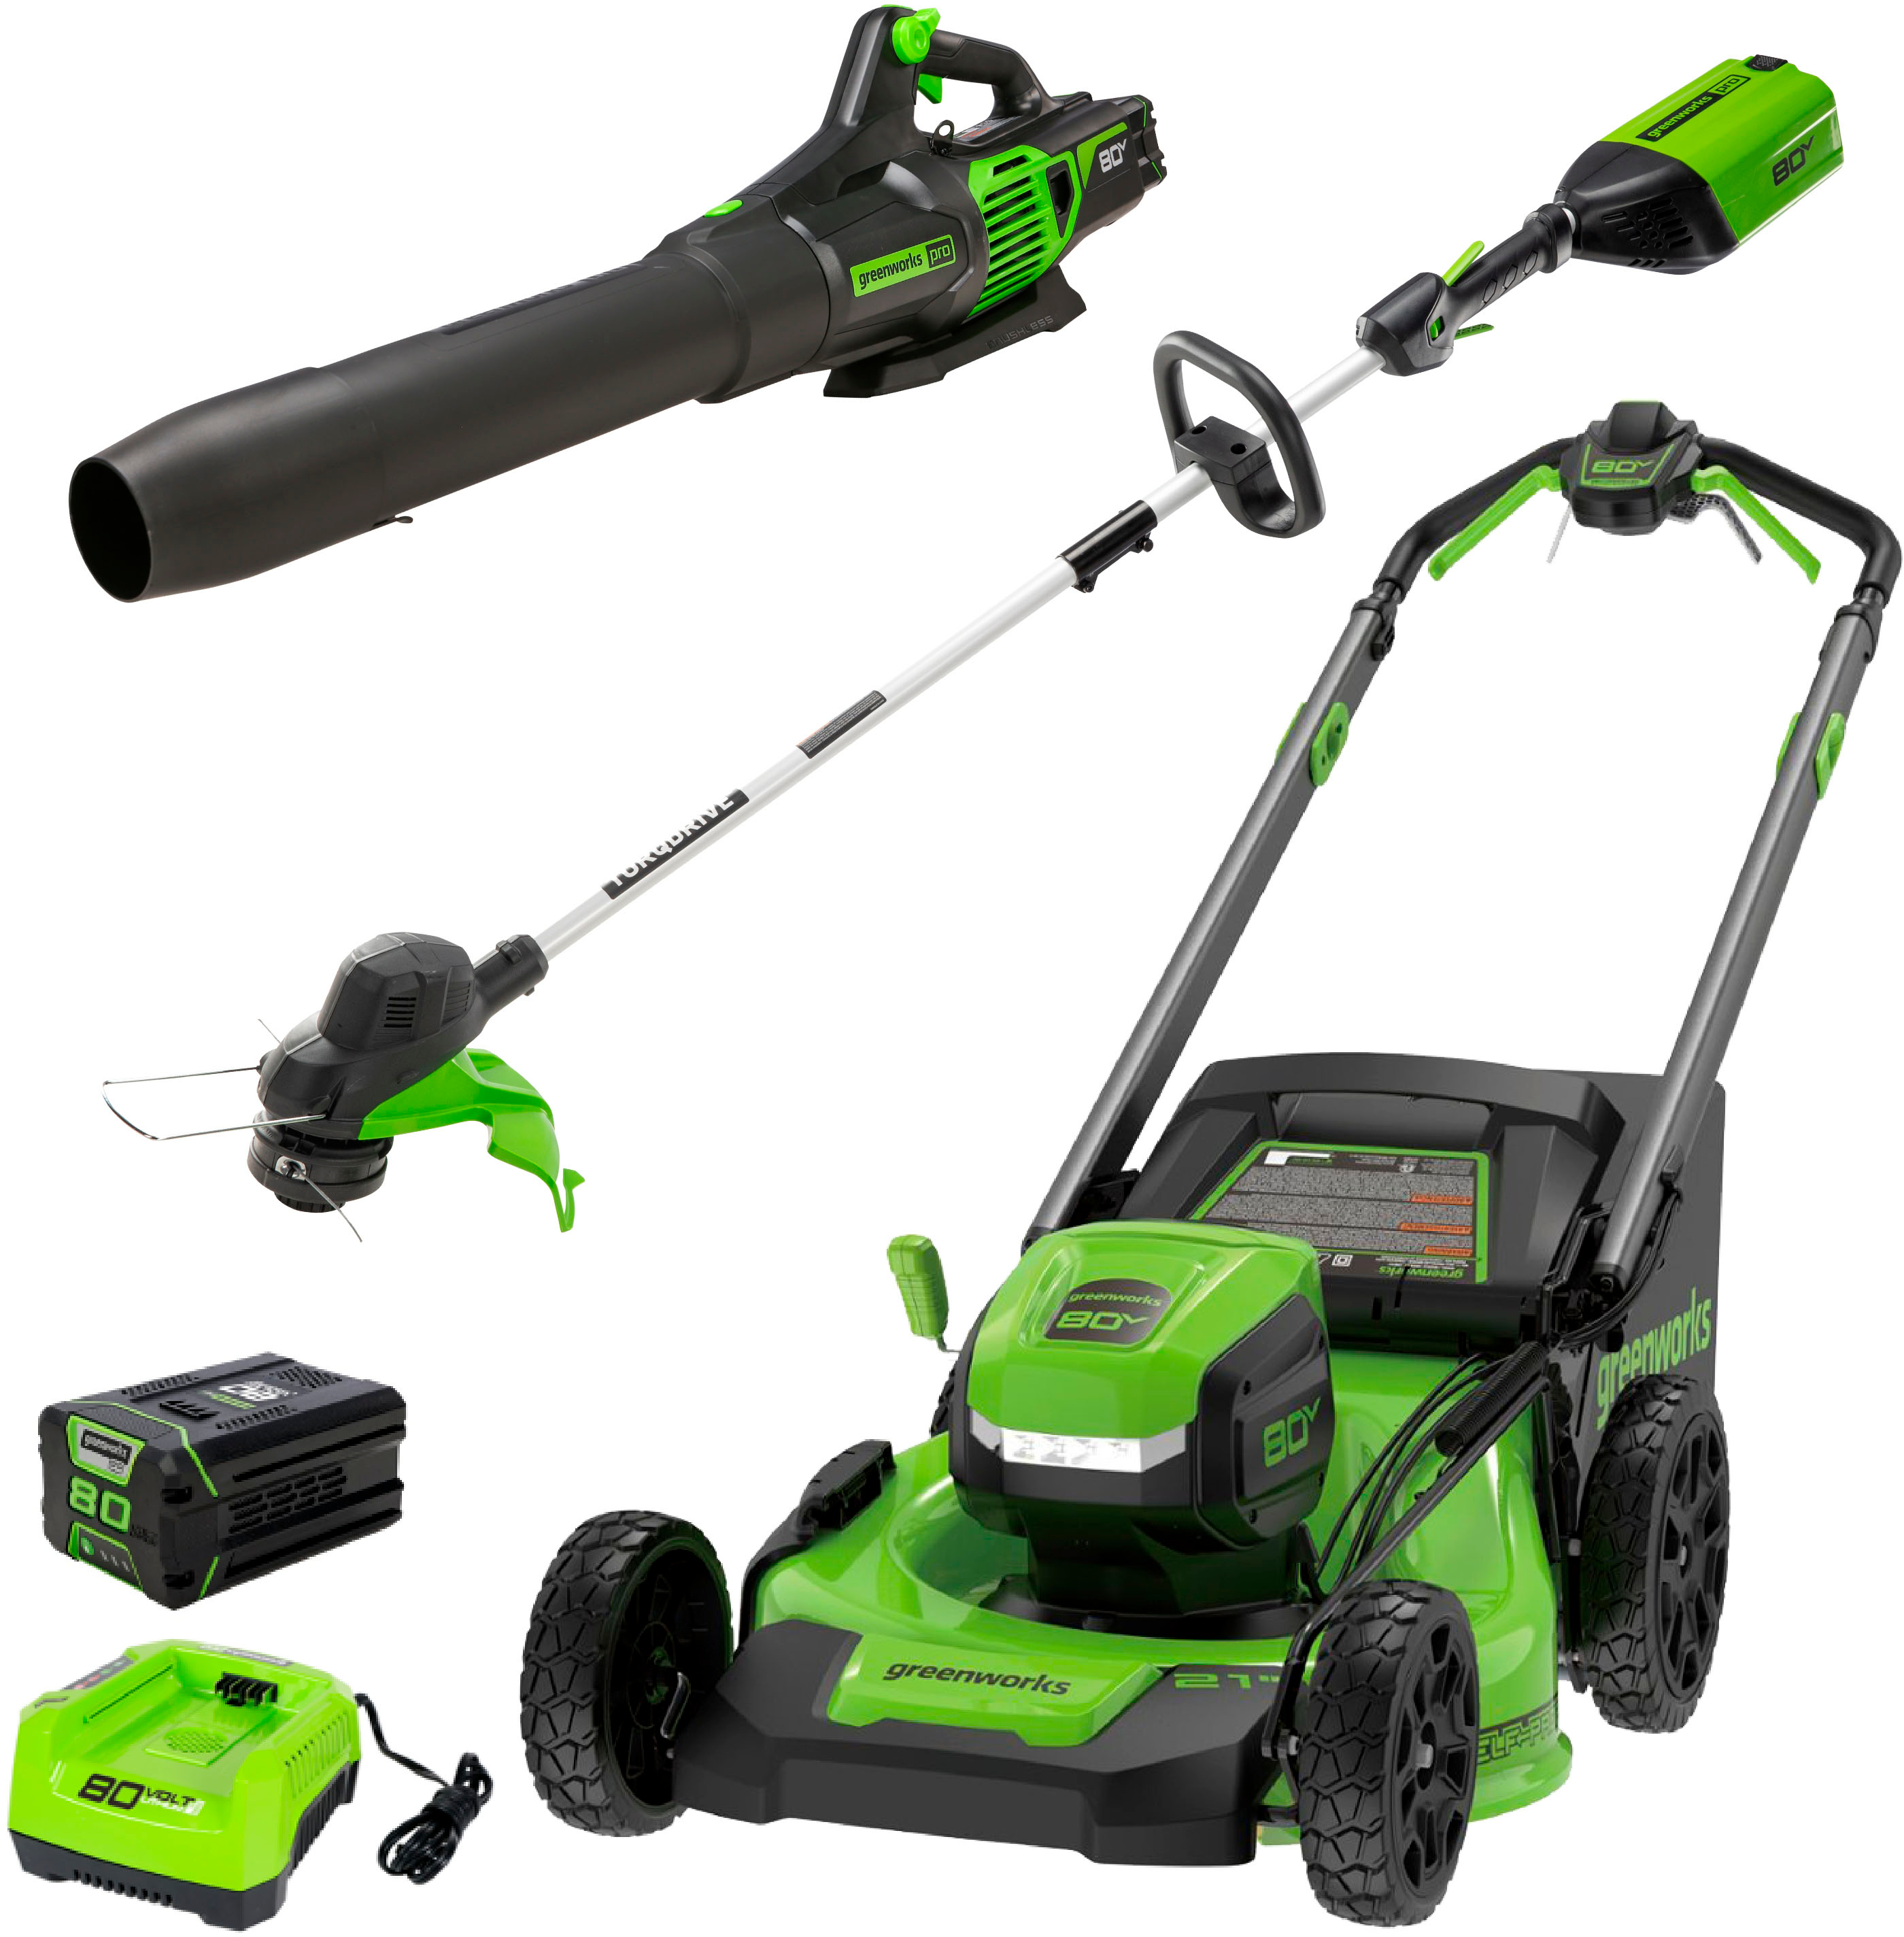 Greenworks 80V 21” Lawn Mower, 13” String Trimmer, and 730 Leaf Blower Combo with 4 Ah Battery & Charger) 3-piece combo Green 1345202 - Best Buy $699.99